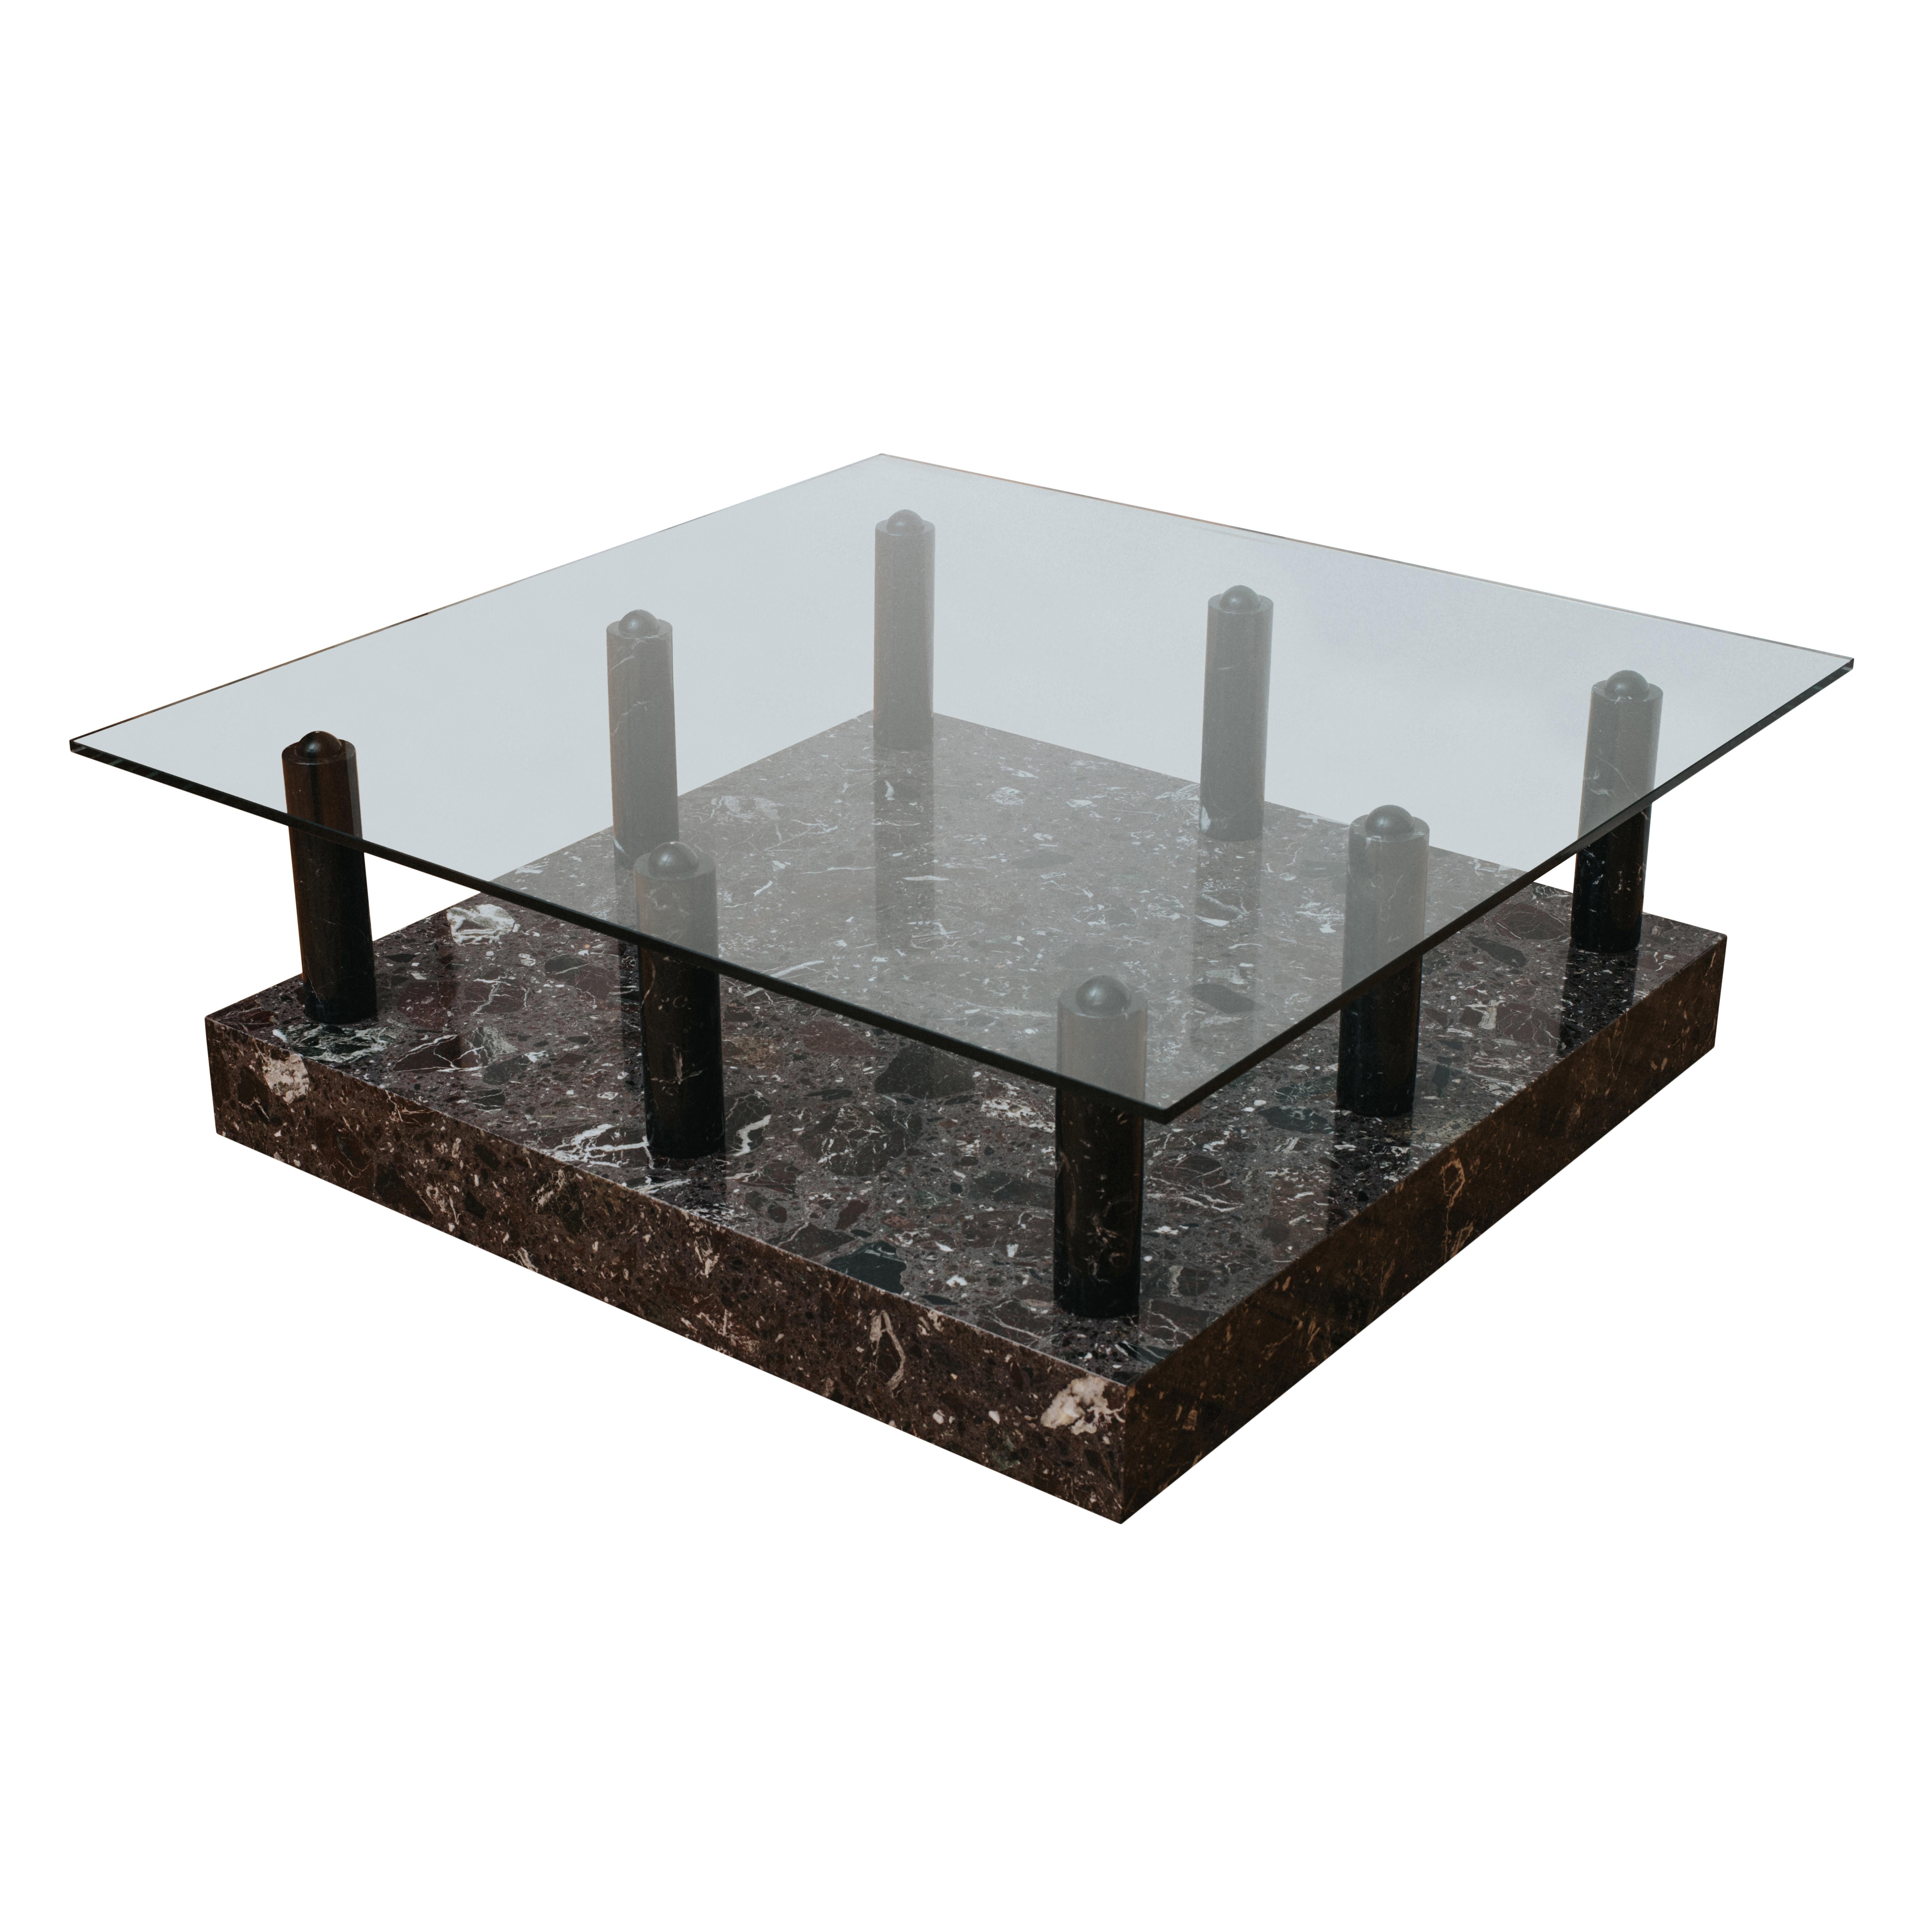 Glass Ettore Sottsass Central Park Cocktail Table in Marble, Rare, 1983 For Sale